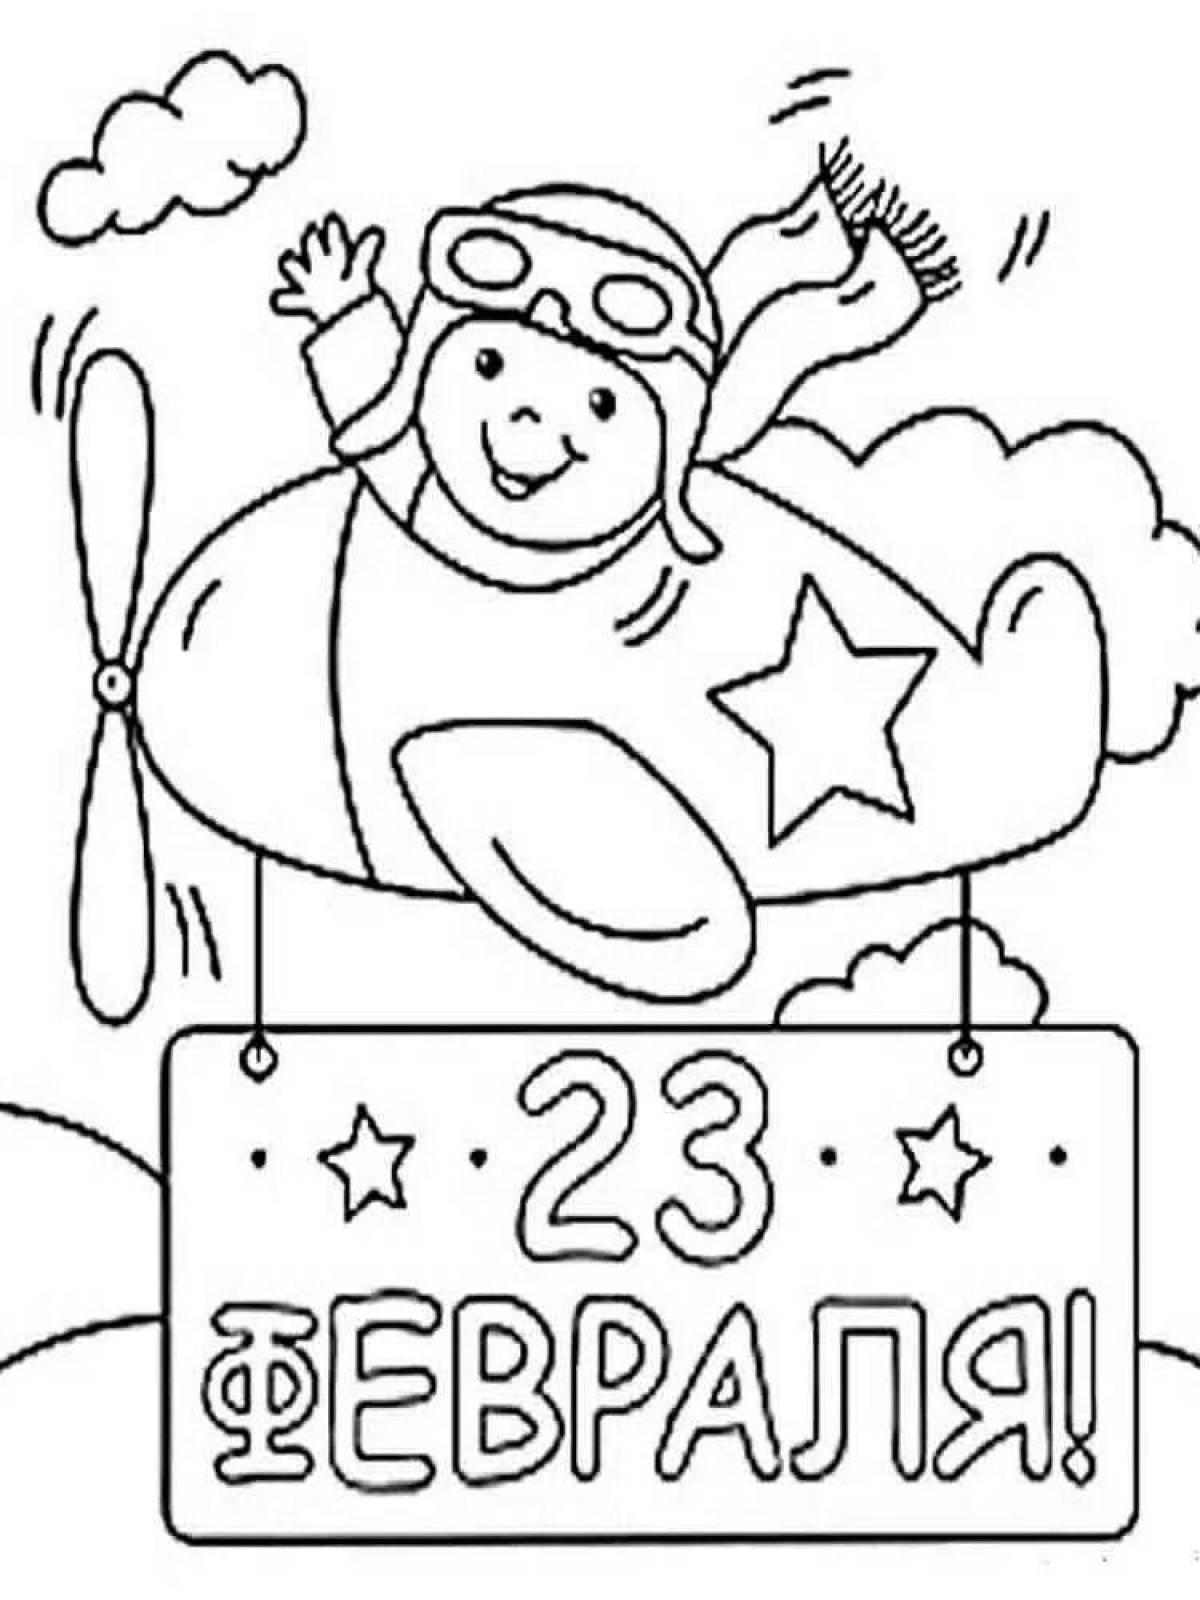 Violent Defender of the Fatherland Day coloring book